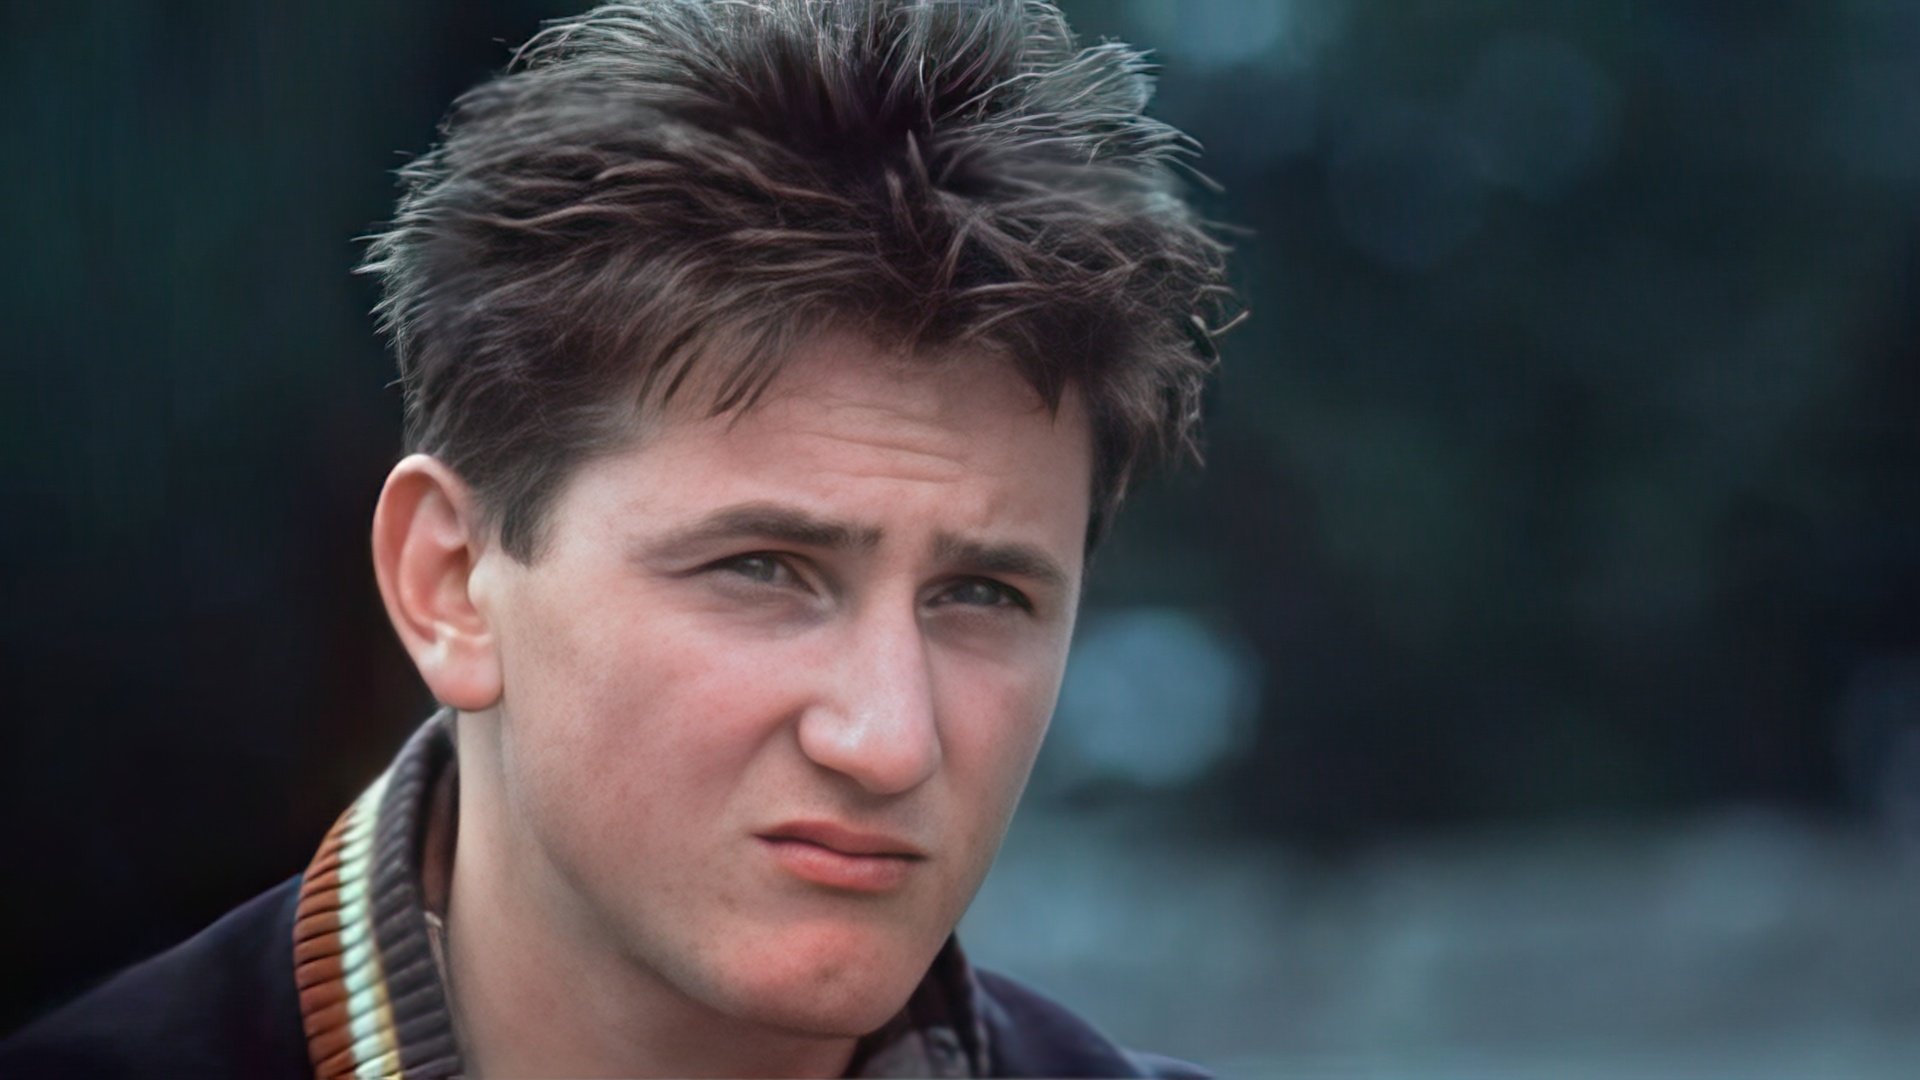 One of the Most Famous Works of the Young Sean Penn (Racing with the Moon)